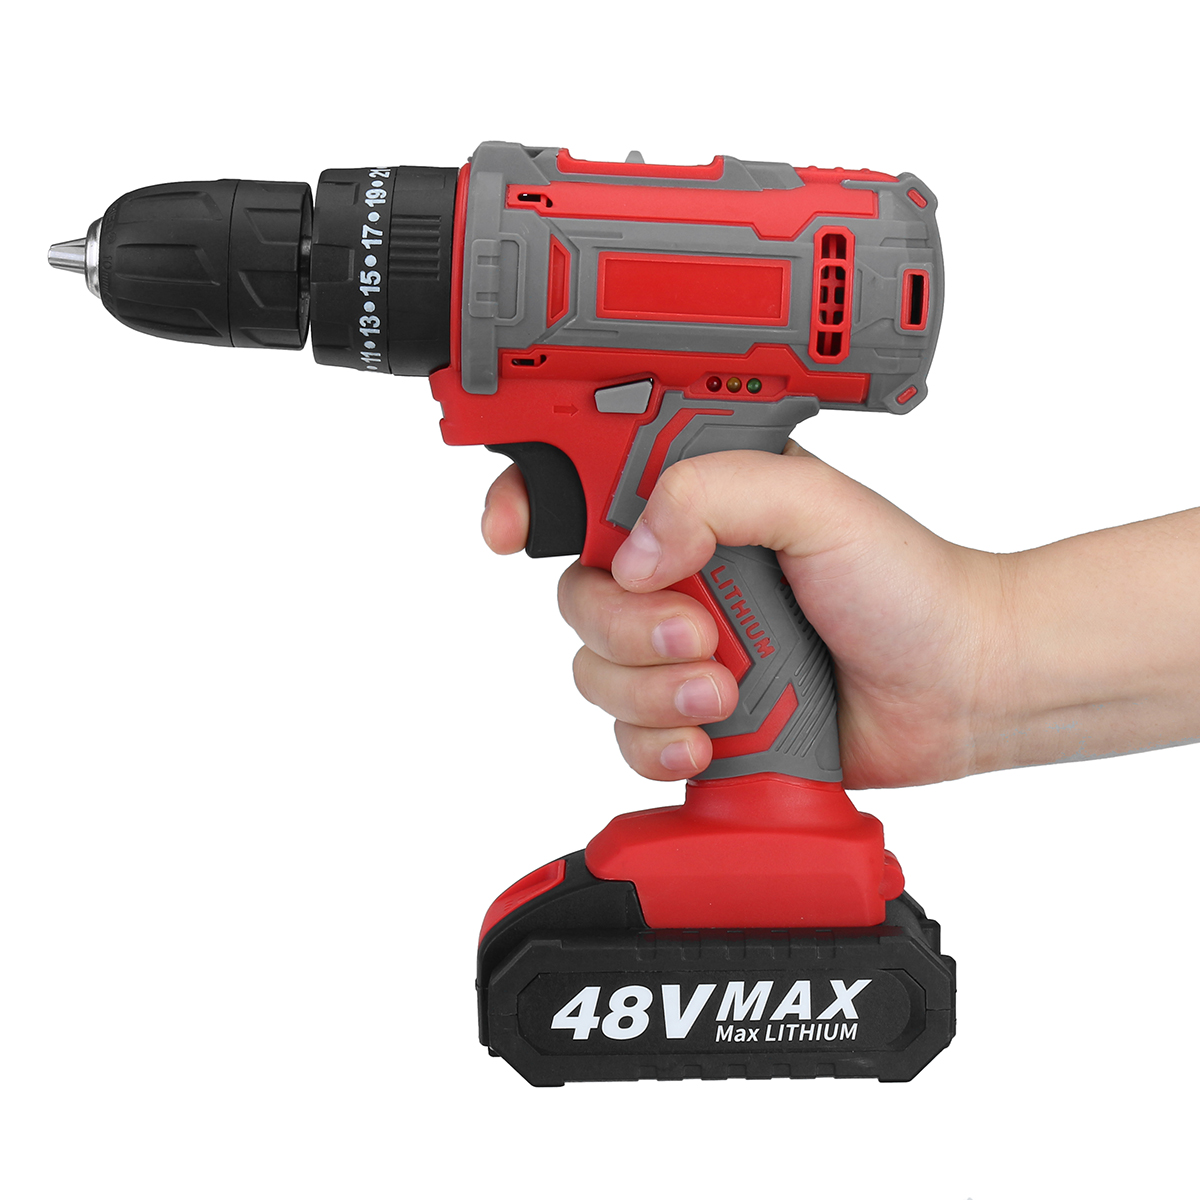 48V-Cordless-Electric-Drill-Tool-Kits-Rechargeable-Dual-Speed-3-Stages-Power-Drill-W-1pc-or-2pcs-Bat-1784738-3